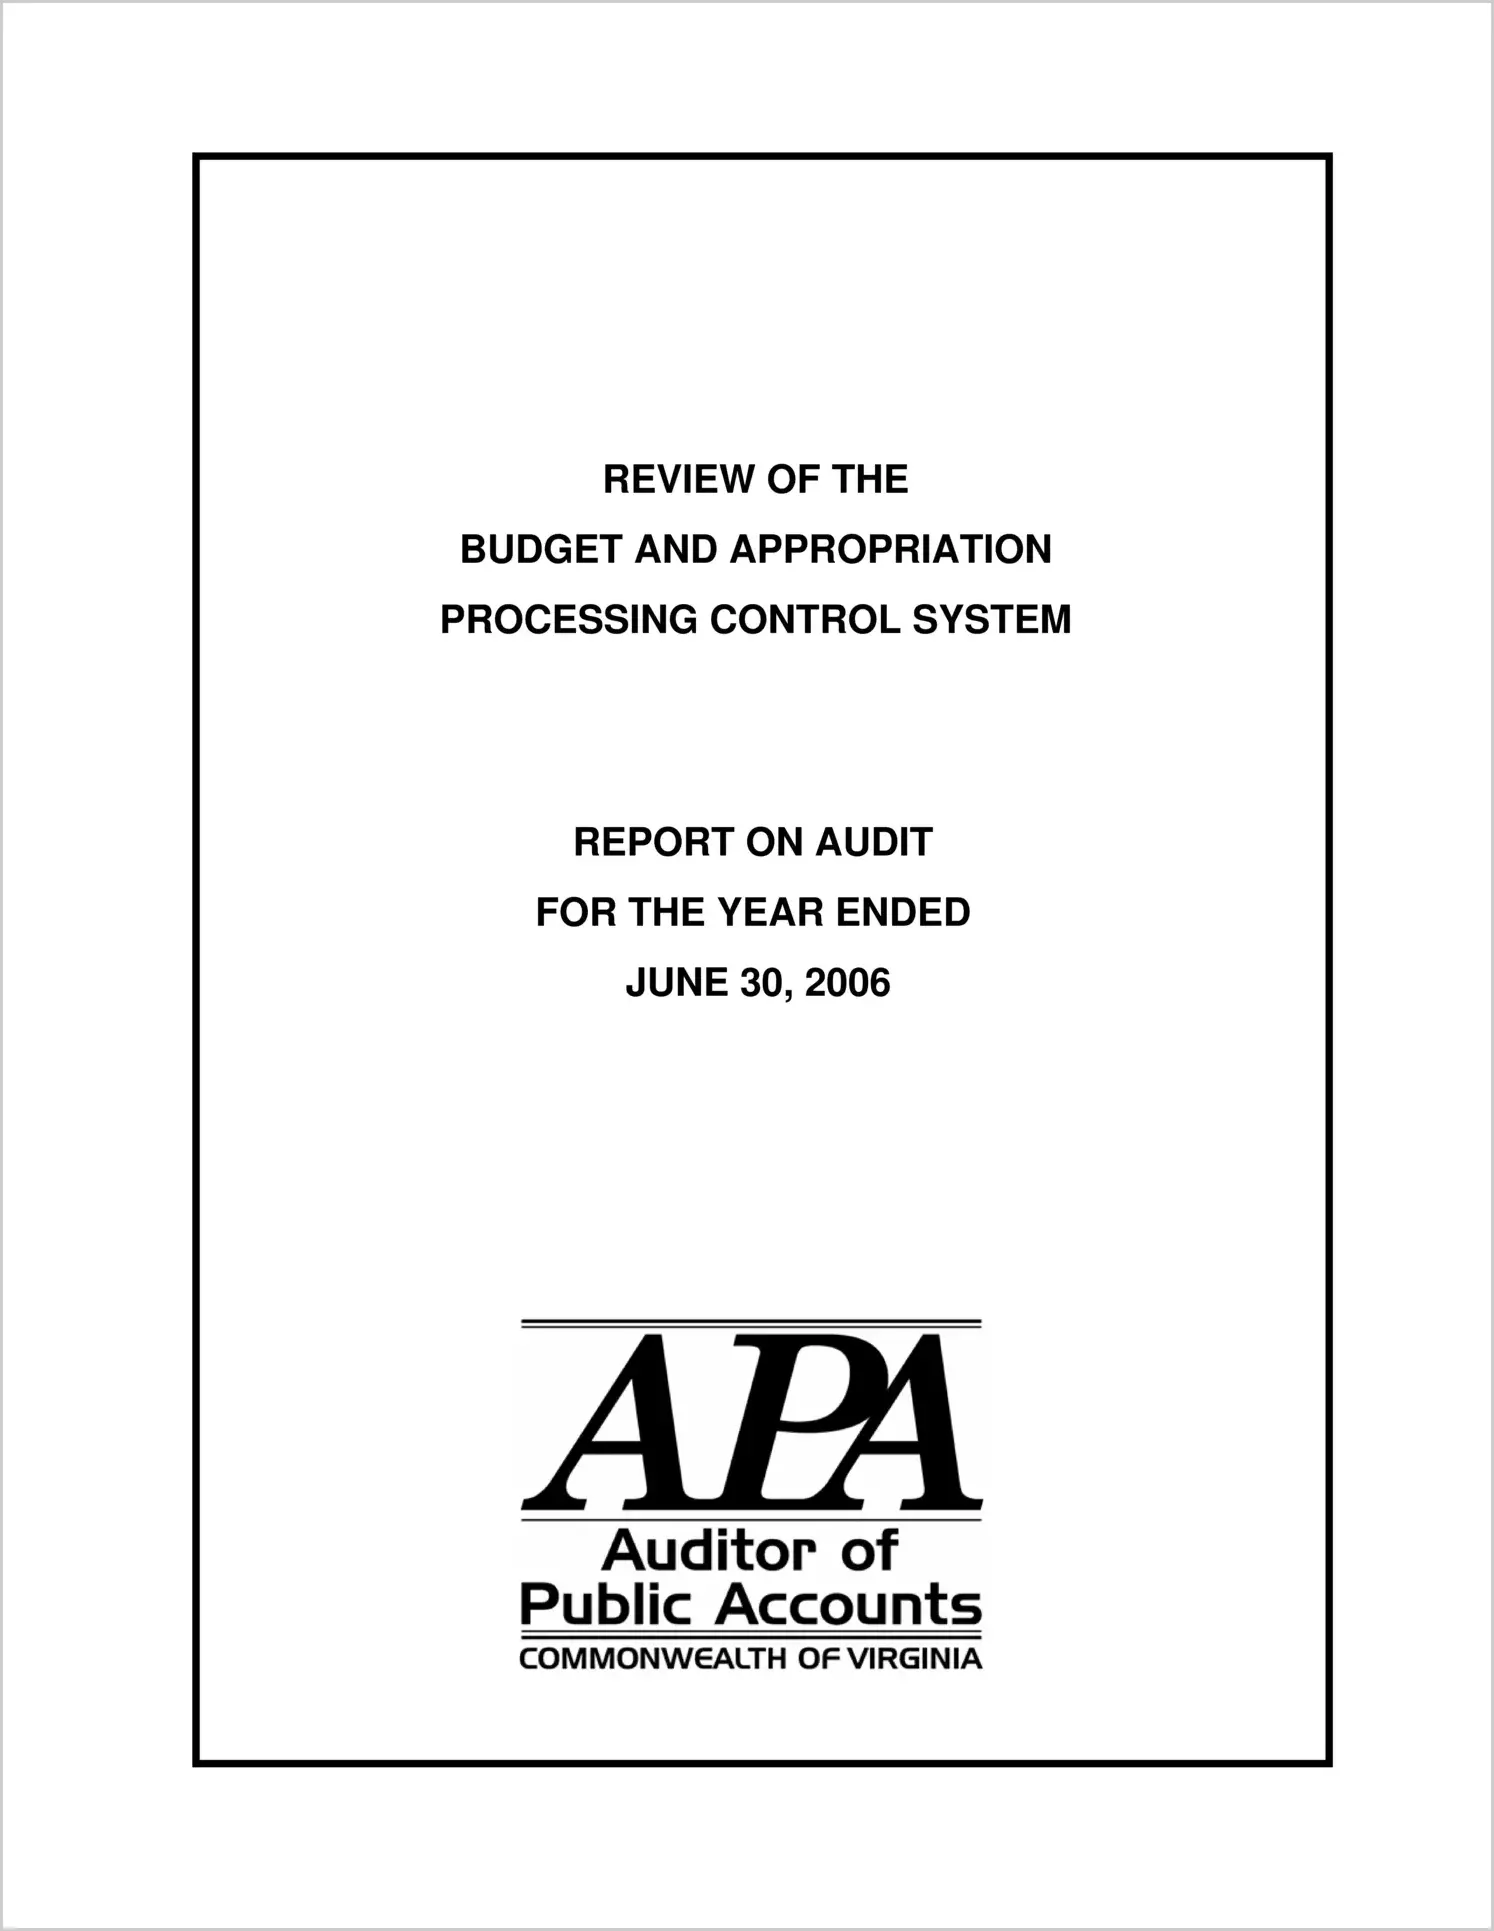 Report on Budget and Appropriation Processing Control System For Fiscal Year Ended June 30, 2006